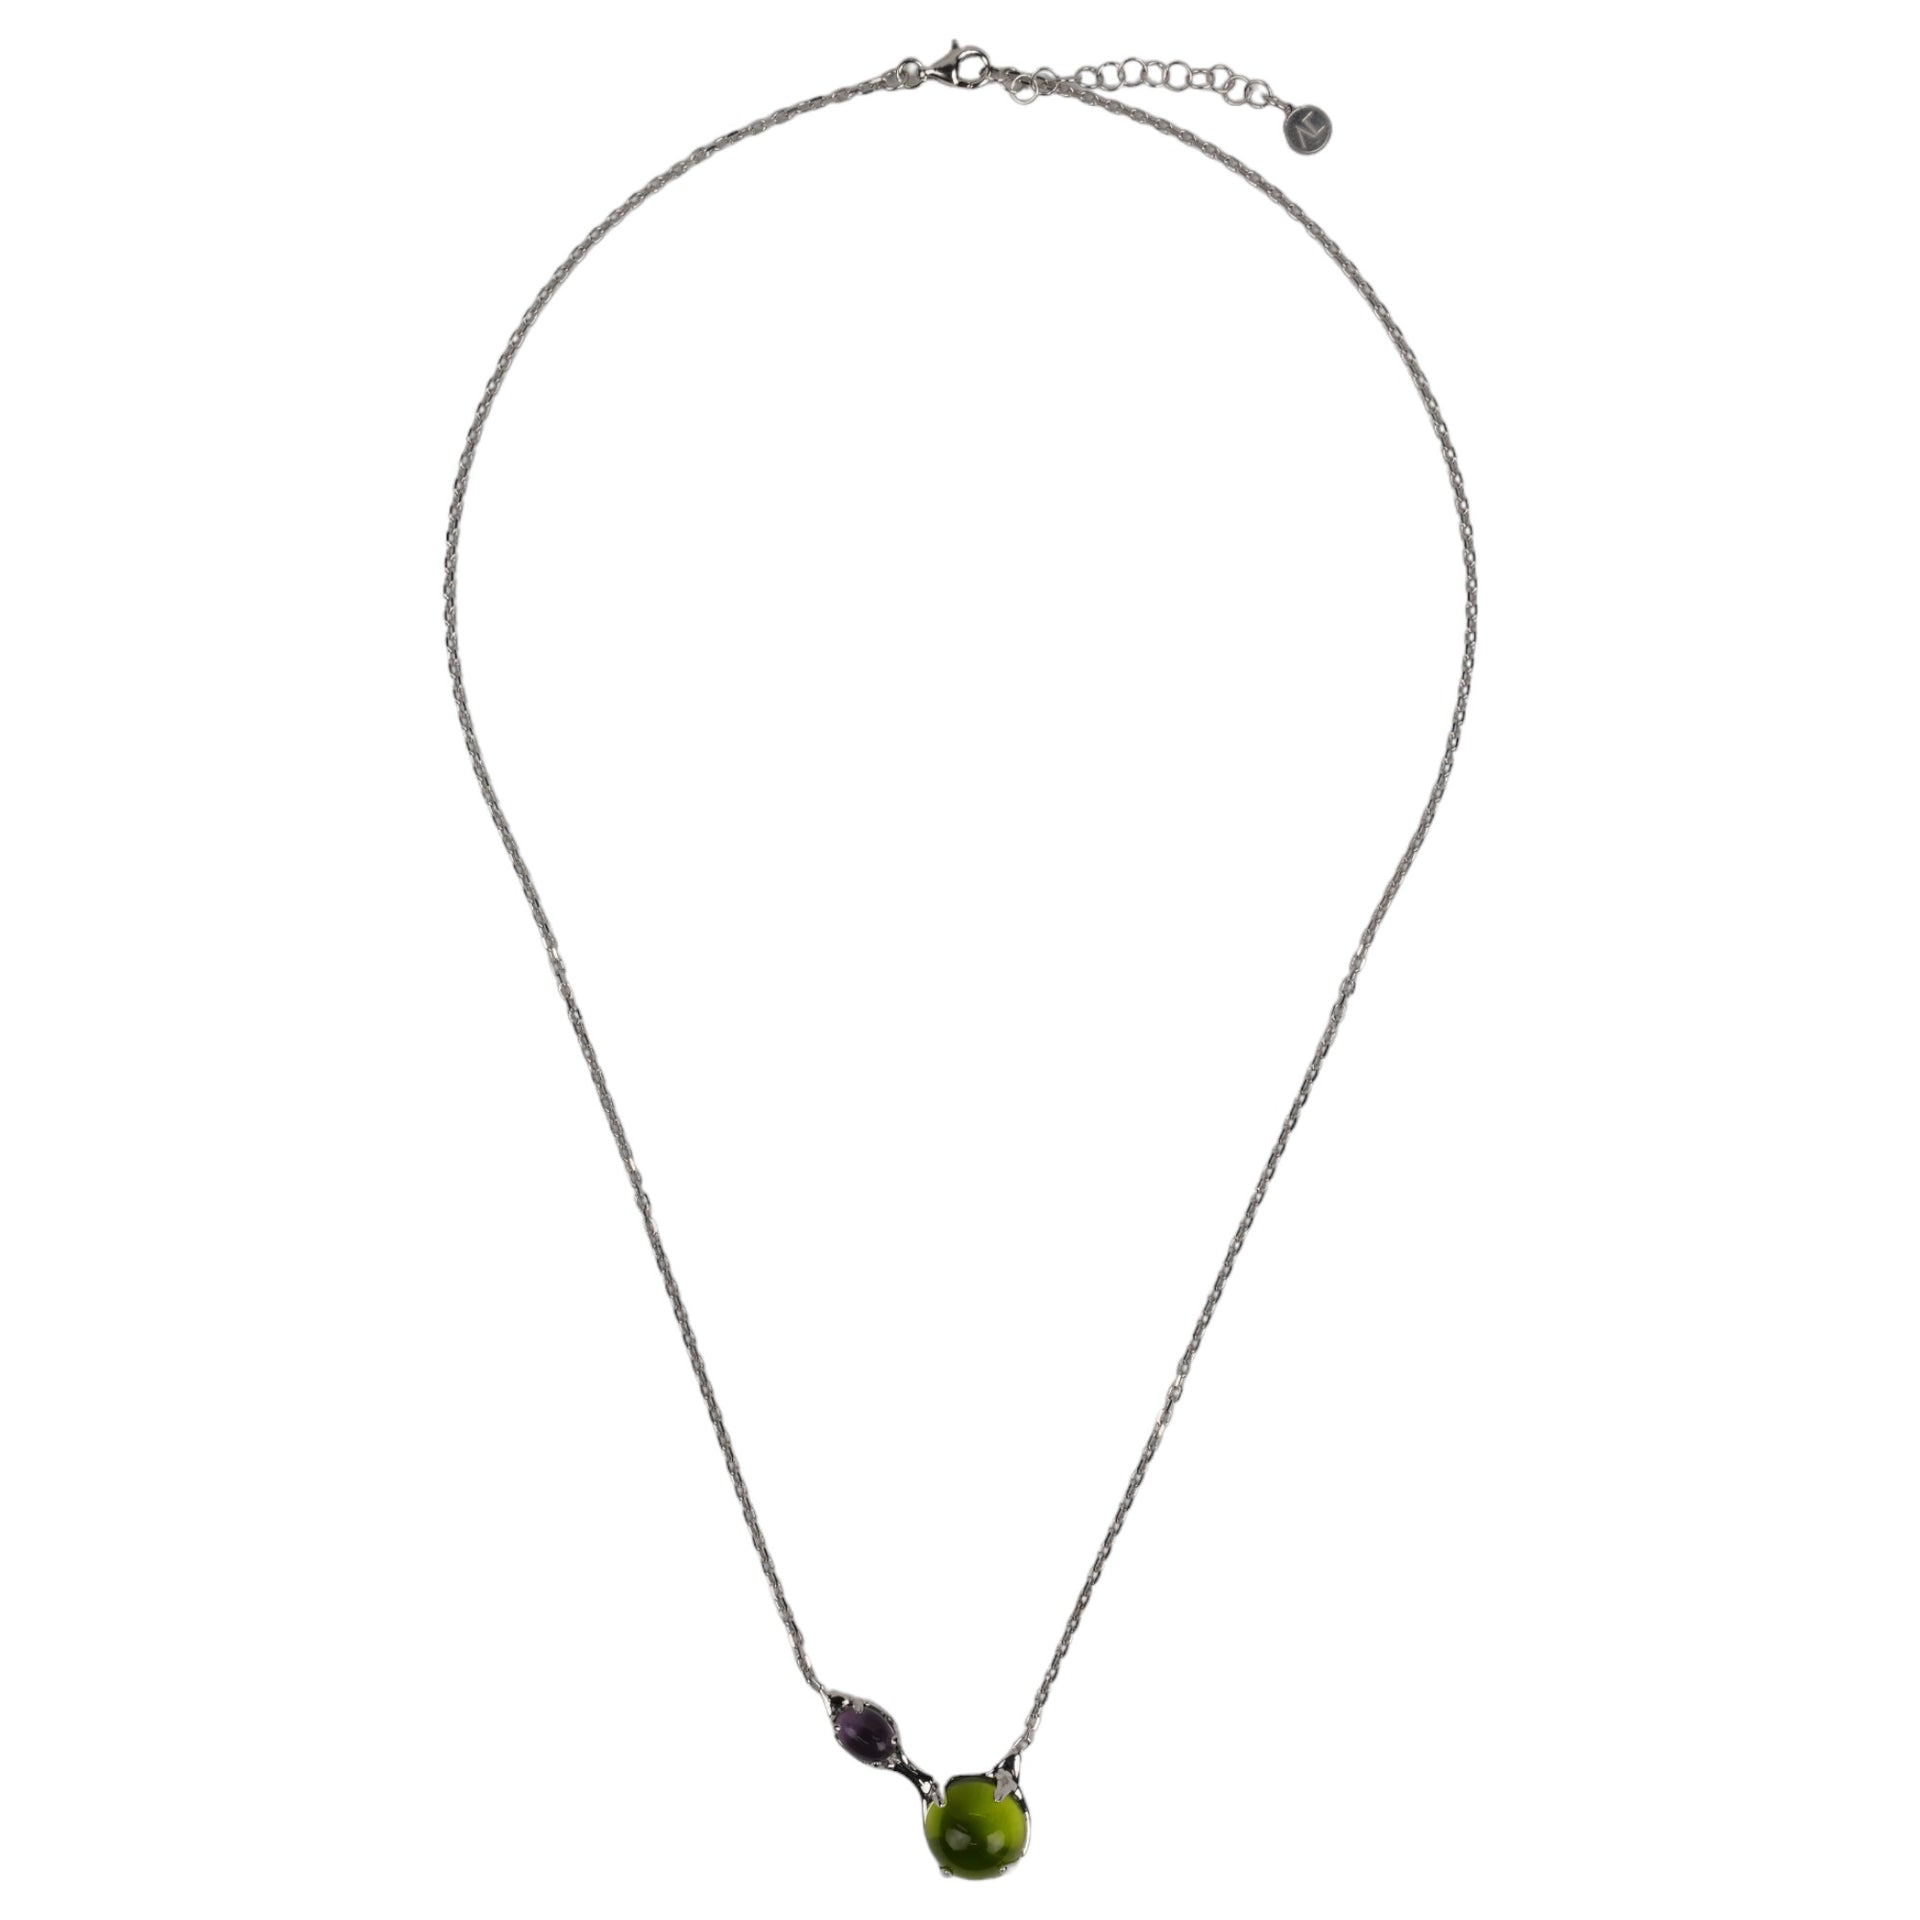 TROPICAL DRIP NECKLACE RH / 925 STERLING SILVER